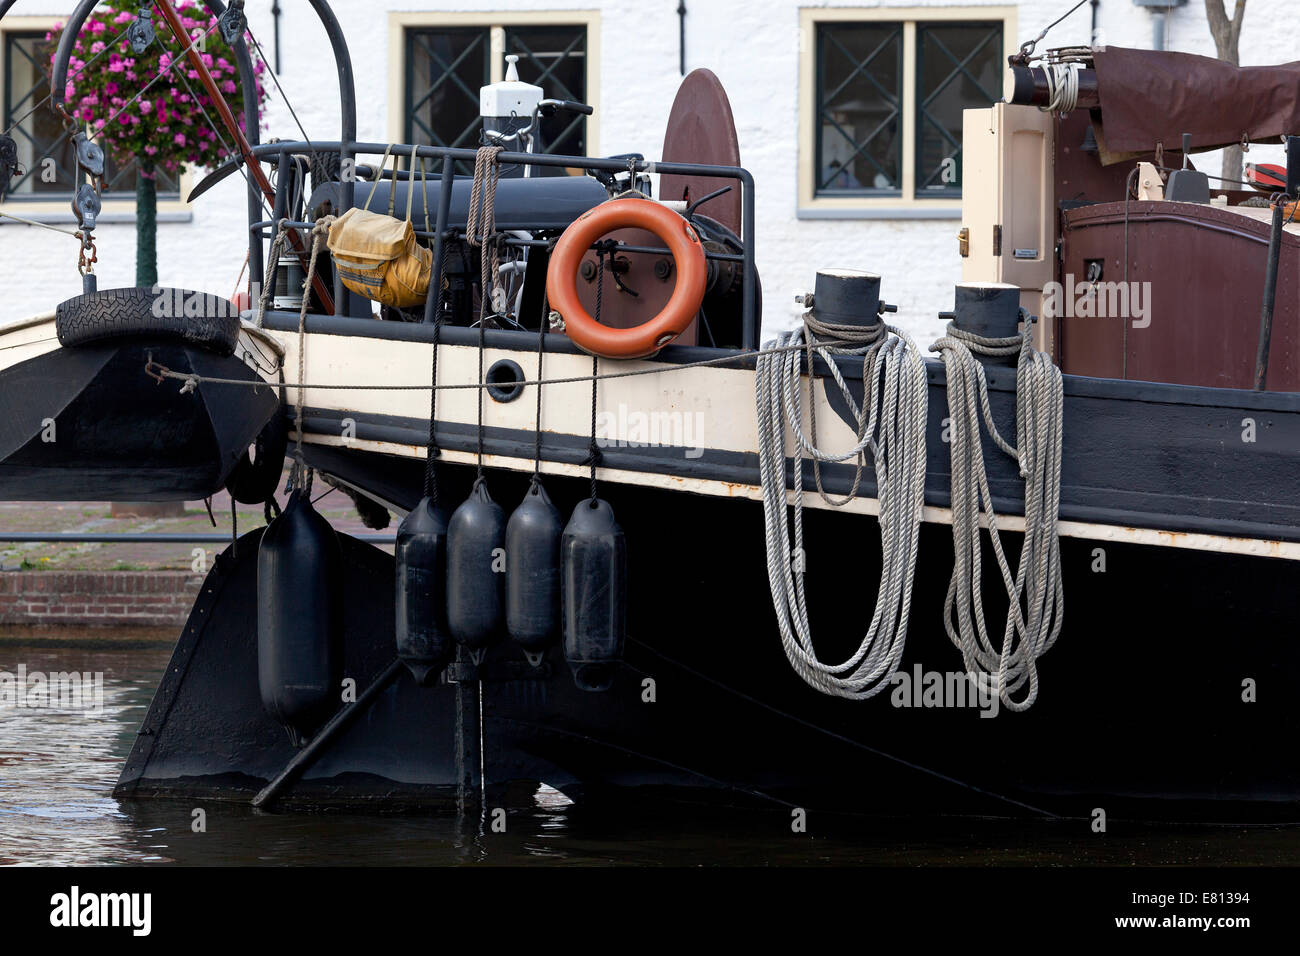 Details of a historical ship in the city of Leiden, Netherlands Stock Photo